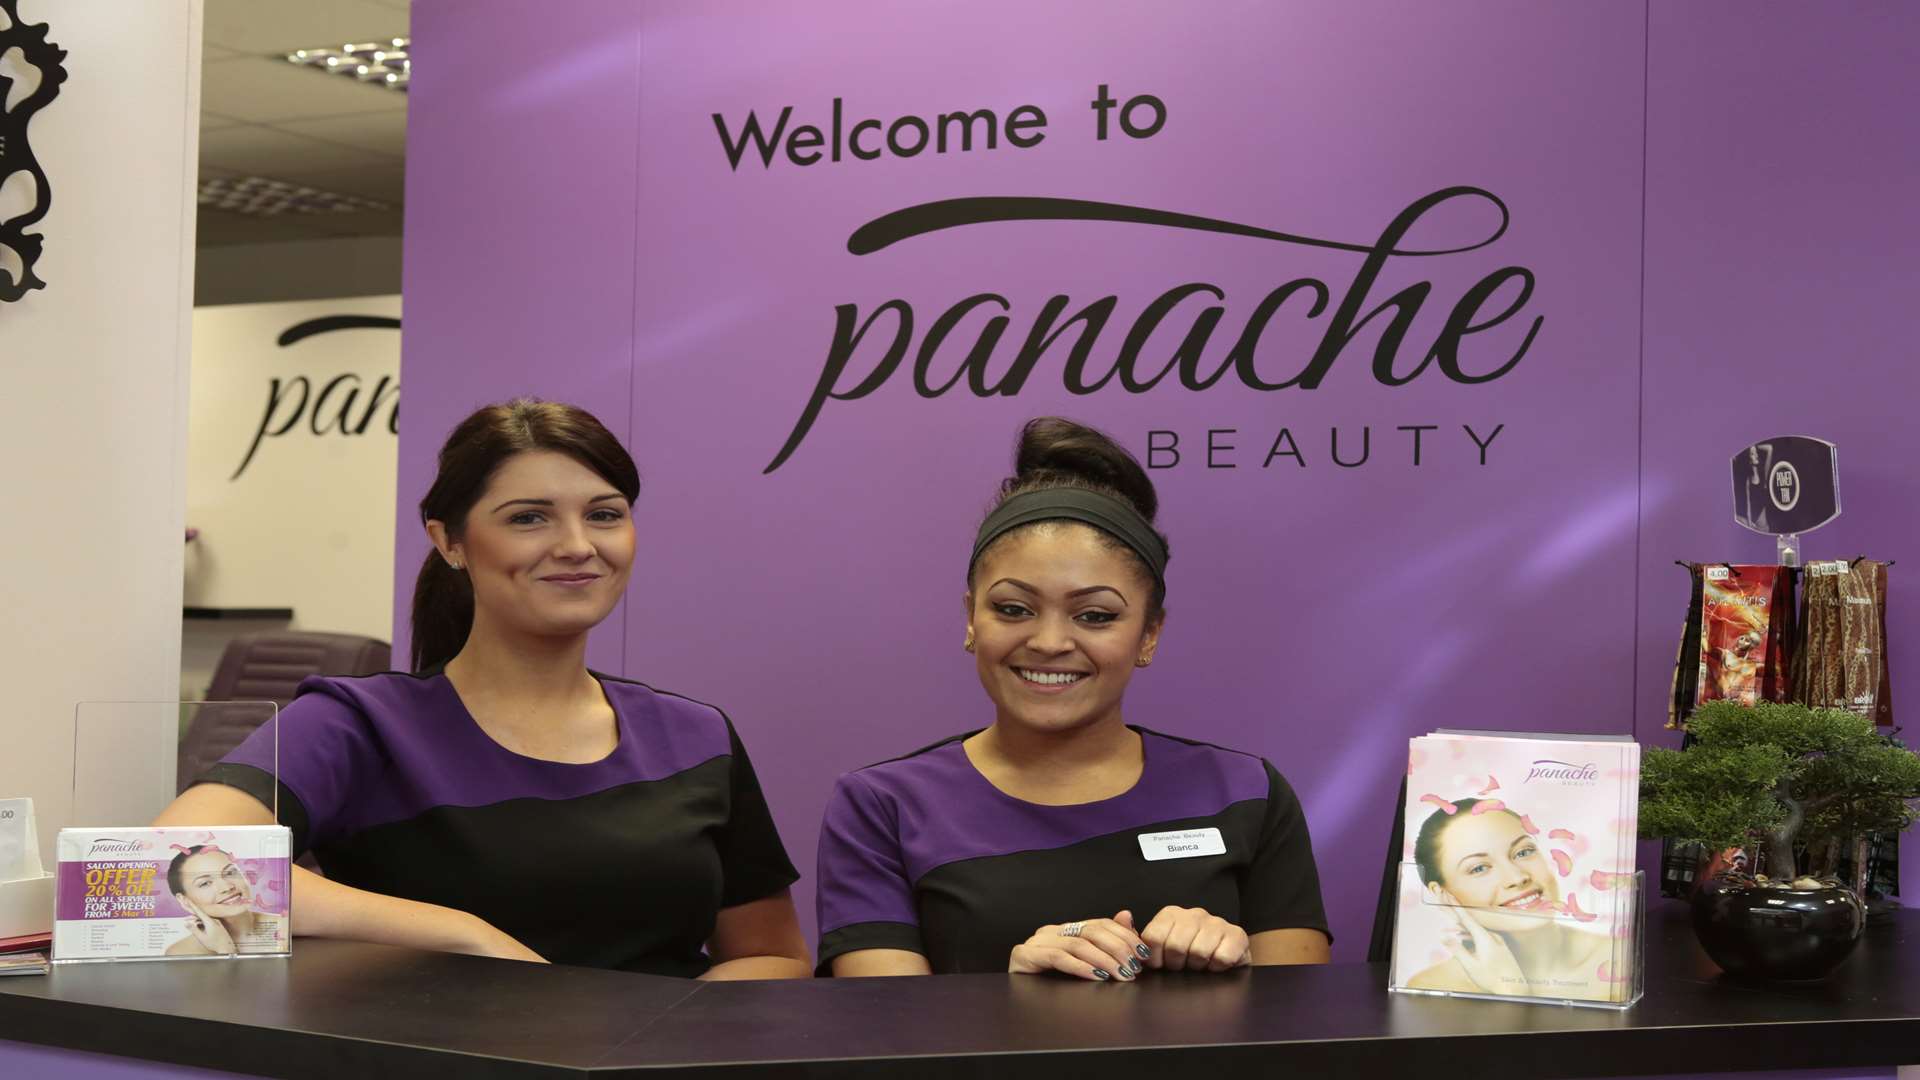 From left, Kirsty Trott and Bianca Caney of Panache Beauty.